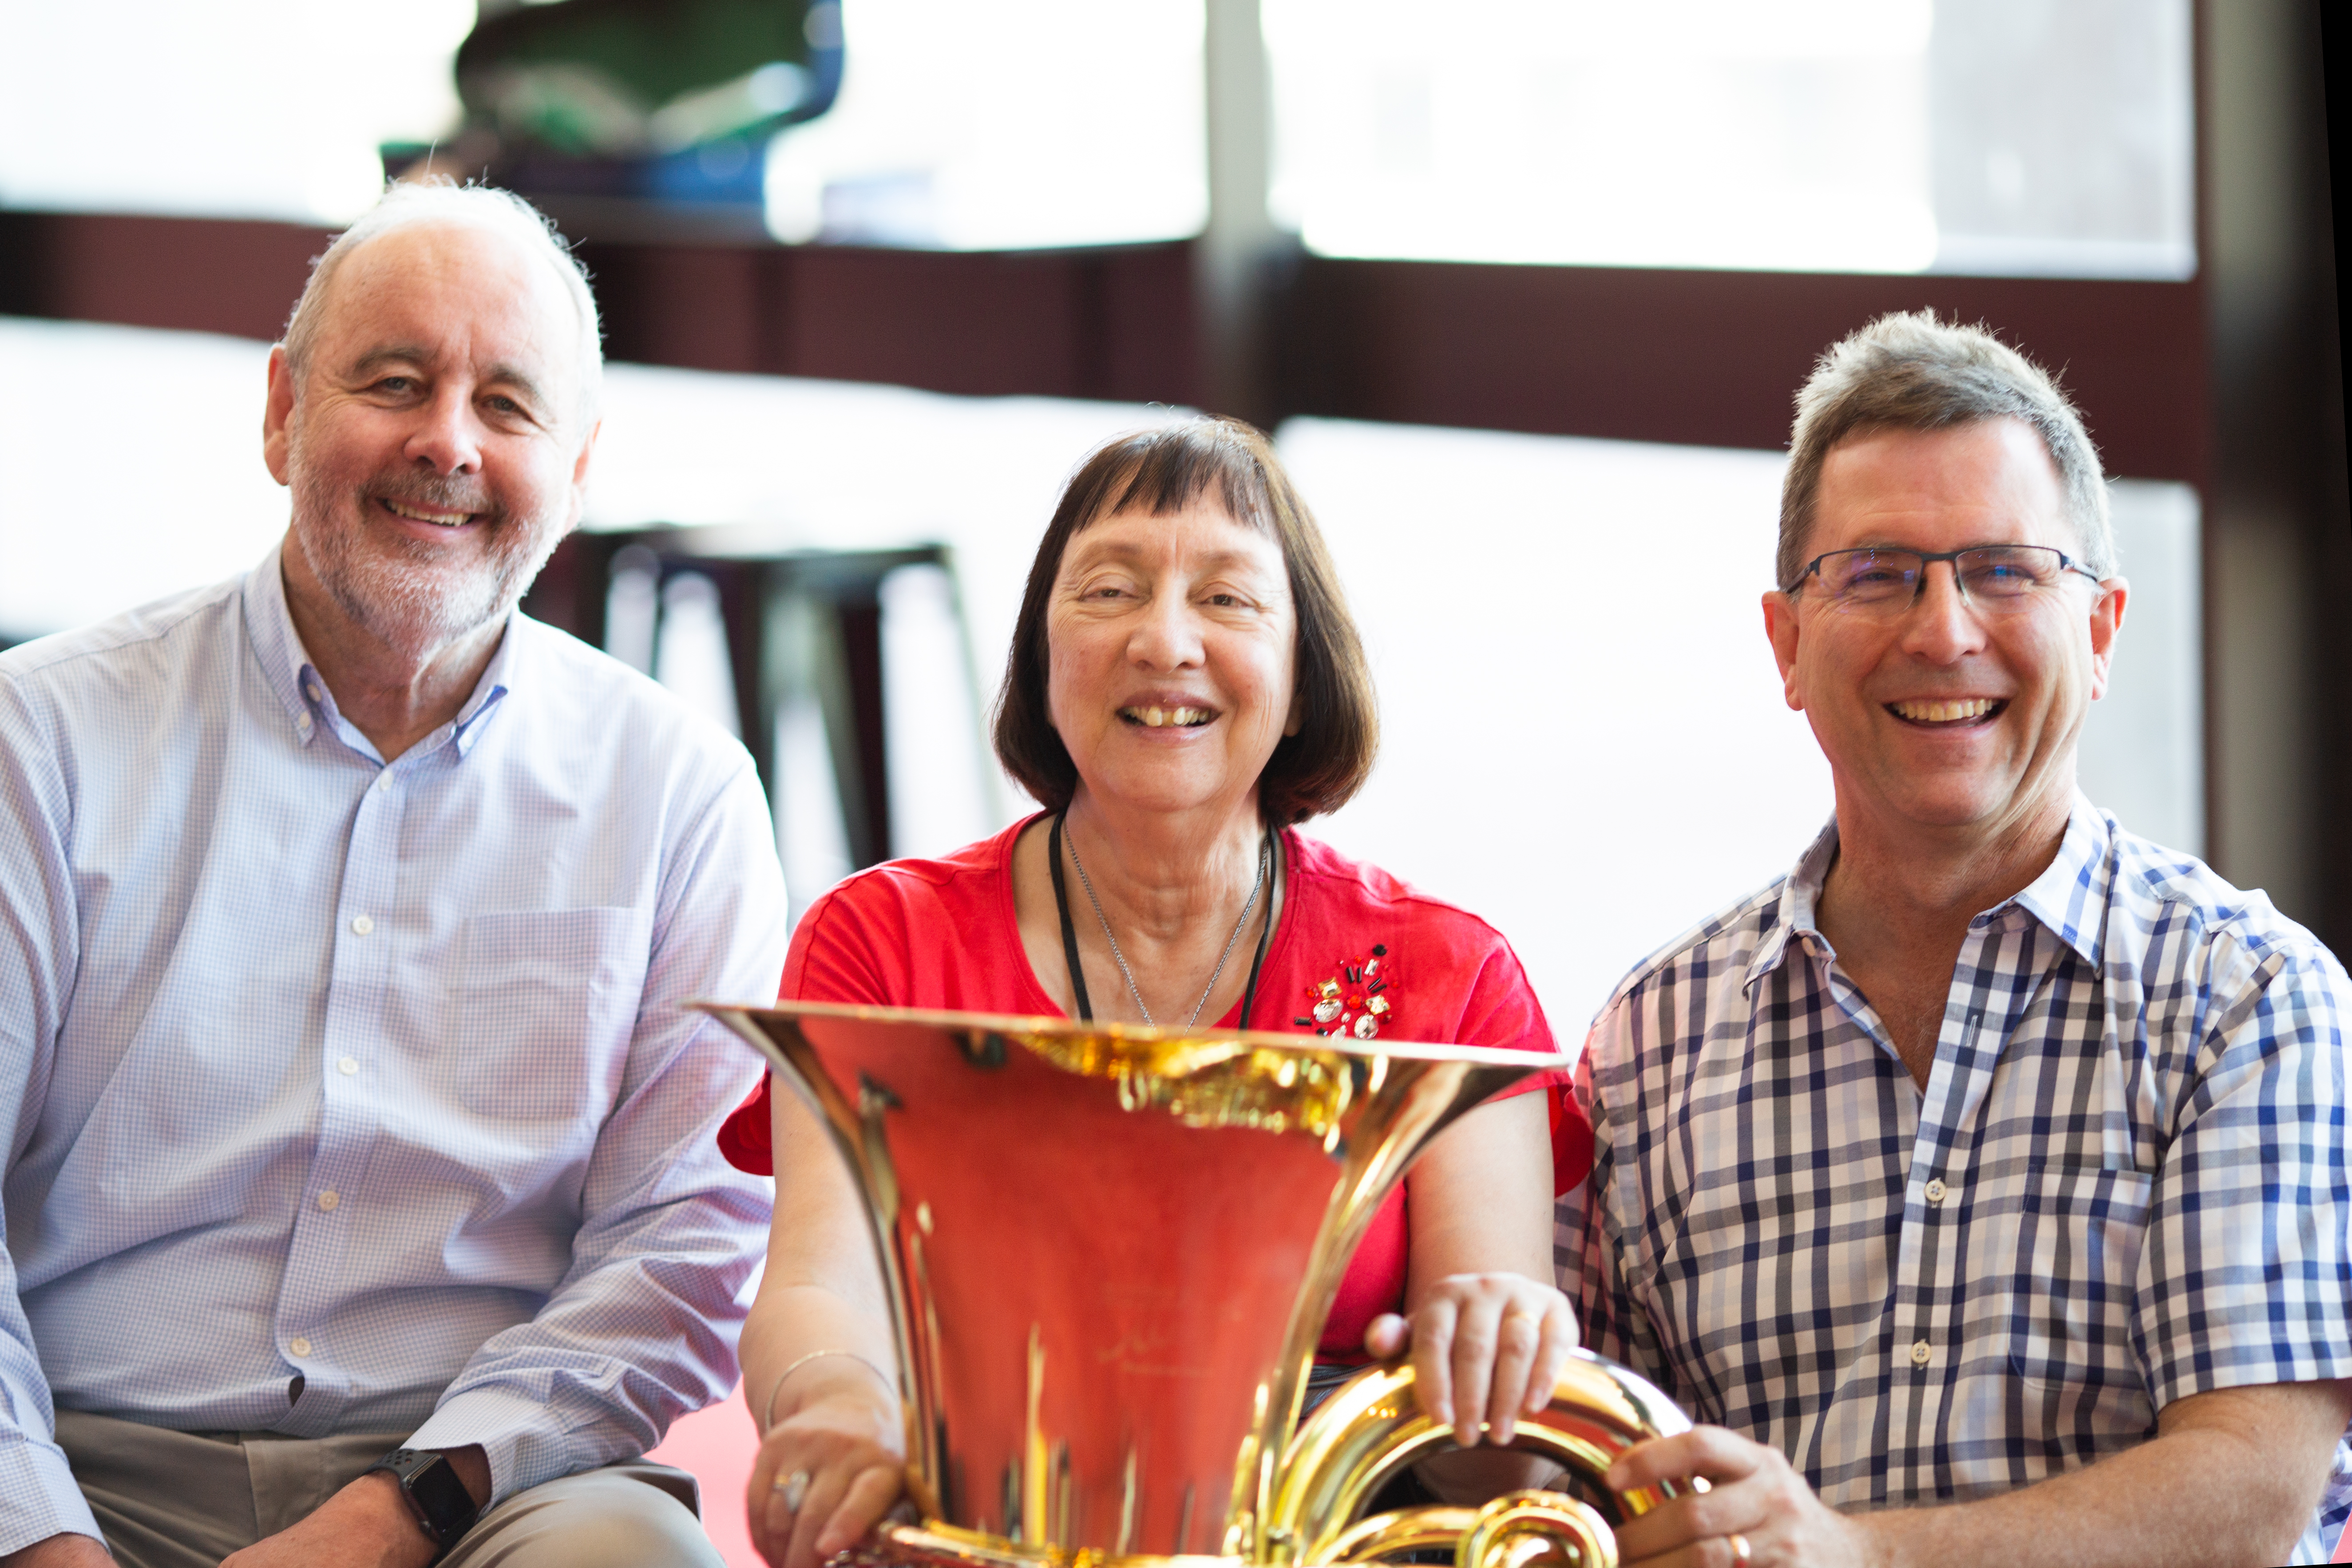 Vision Australia CEO Ron Hooton with client Pam and WASO musician. Photos by Alanna Kusin, WASO.